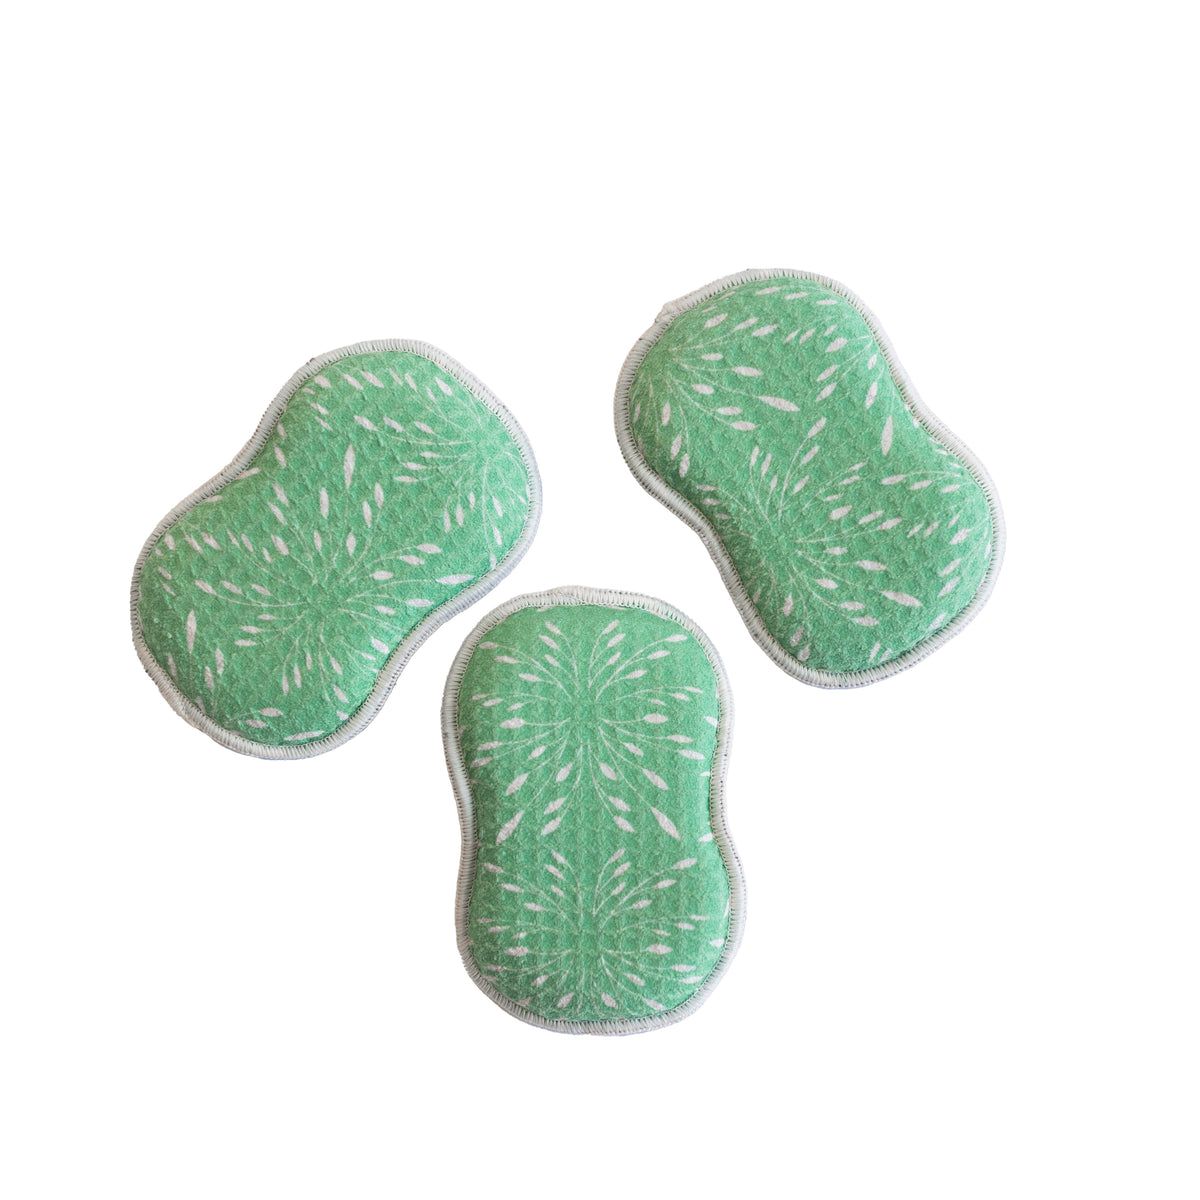 RE:usable Sponges (Set of 3) - RJW New Bloom Sponges &amp; Scouring Pads Once Again Home Co. Papyrus Cream  